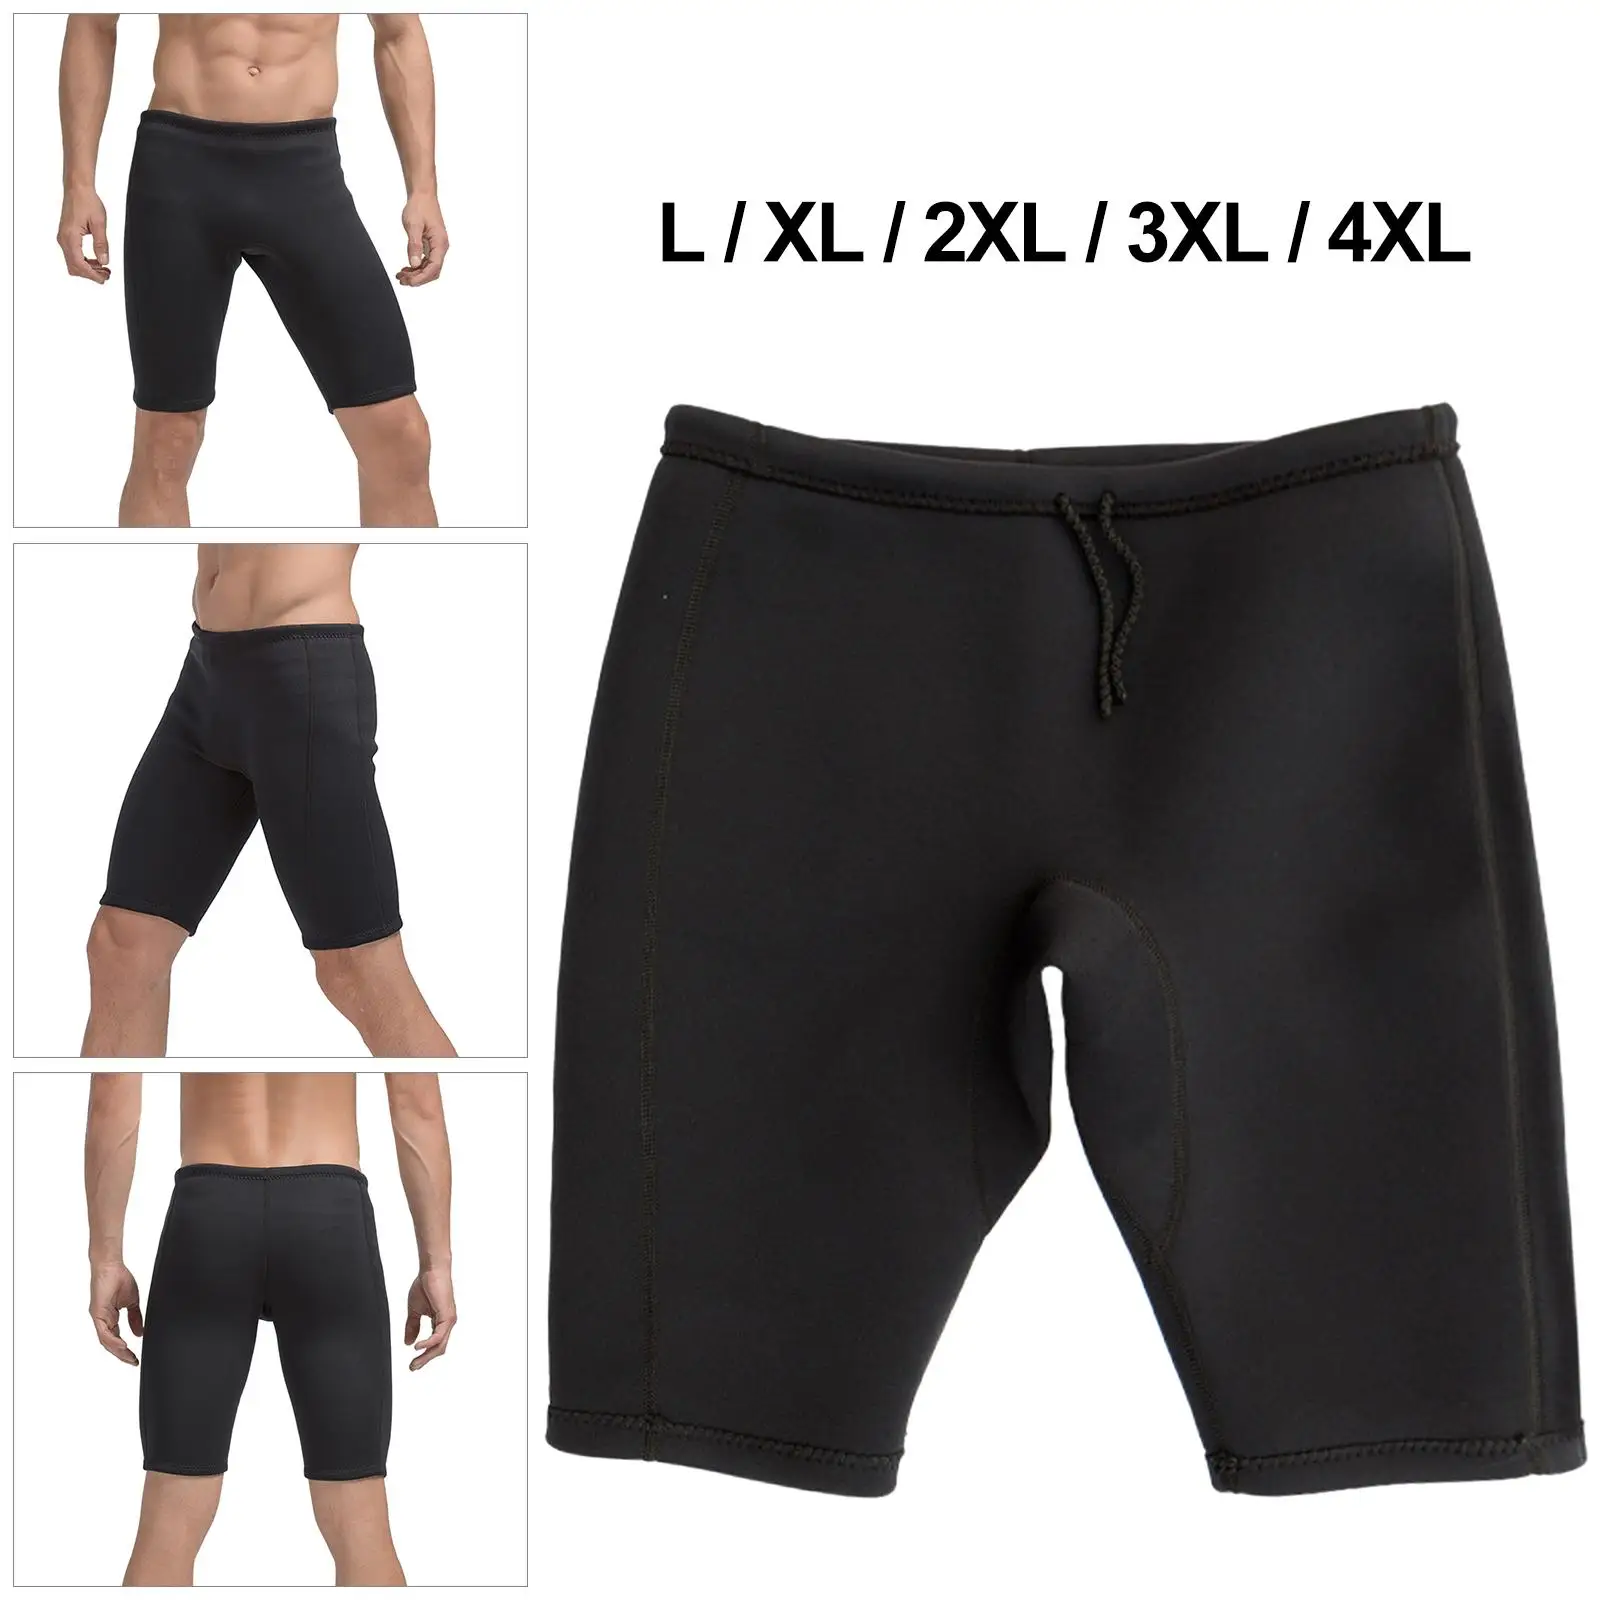 Mens Wetsuit Shorts Outdoor Swimming Pants, 3mm Neoprene Diving Wet Suit Trunks Trousers for Surfing Snorkeling  Sports